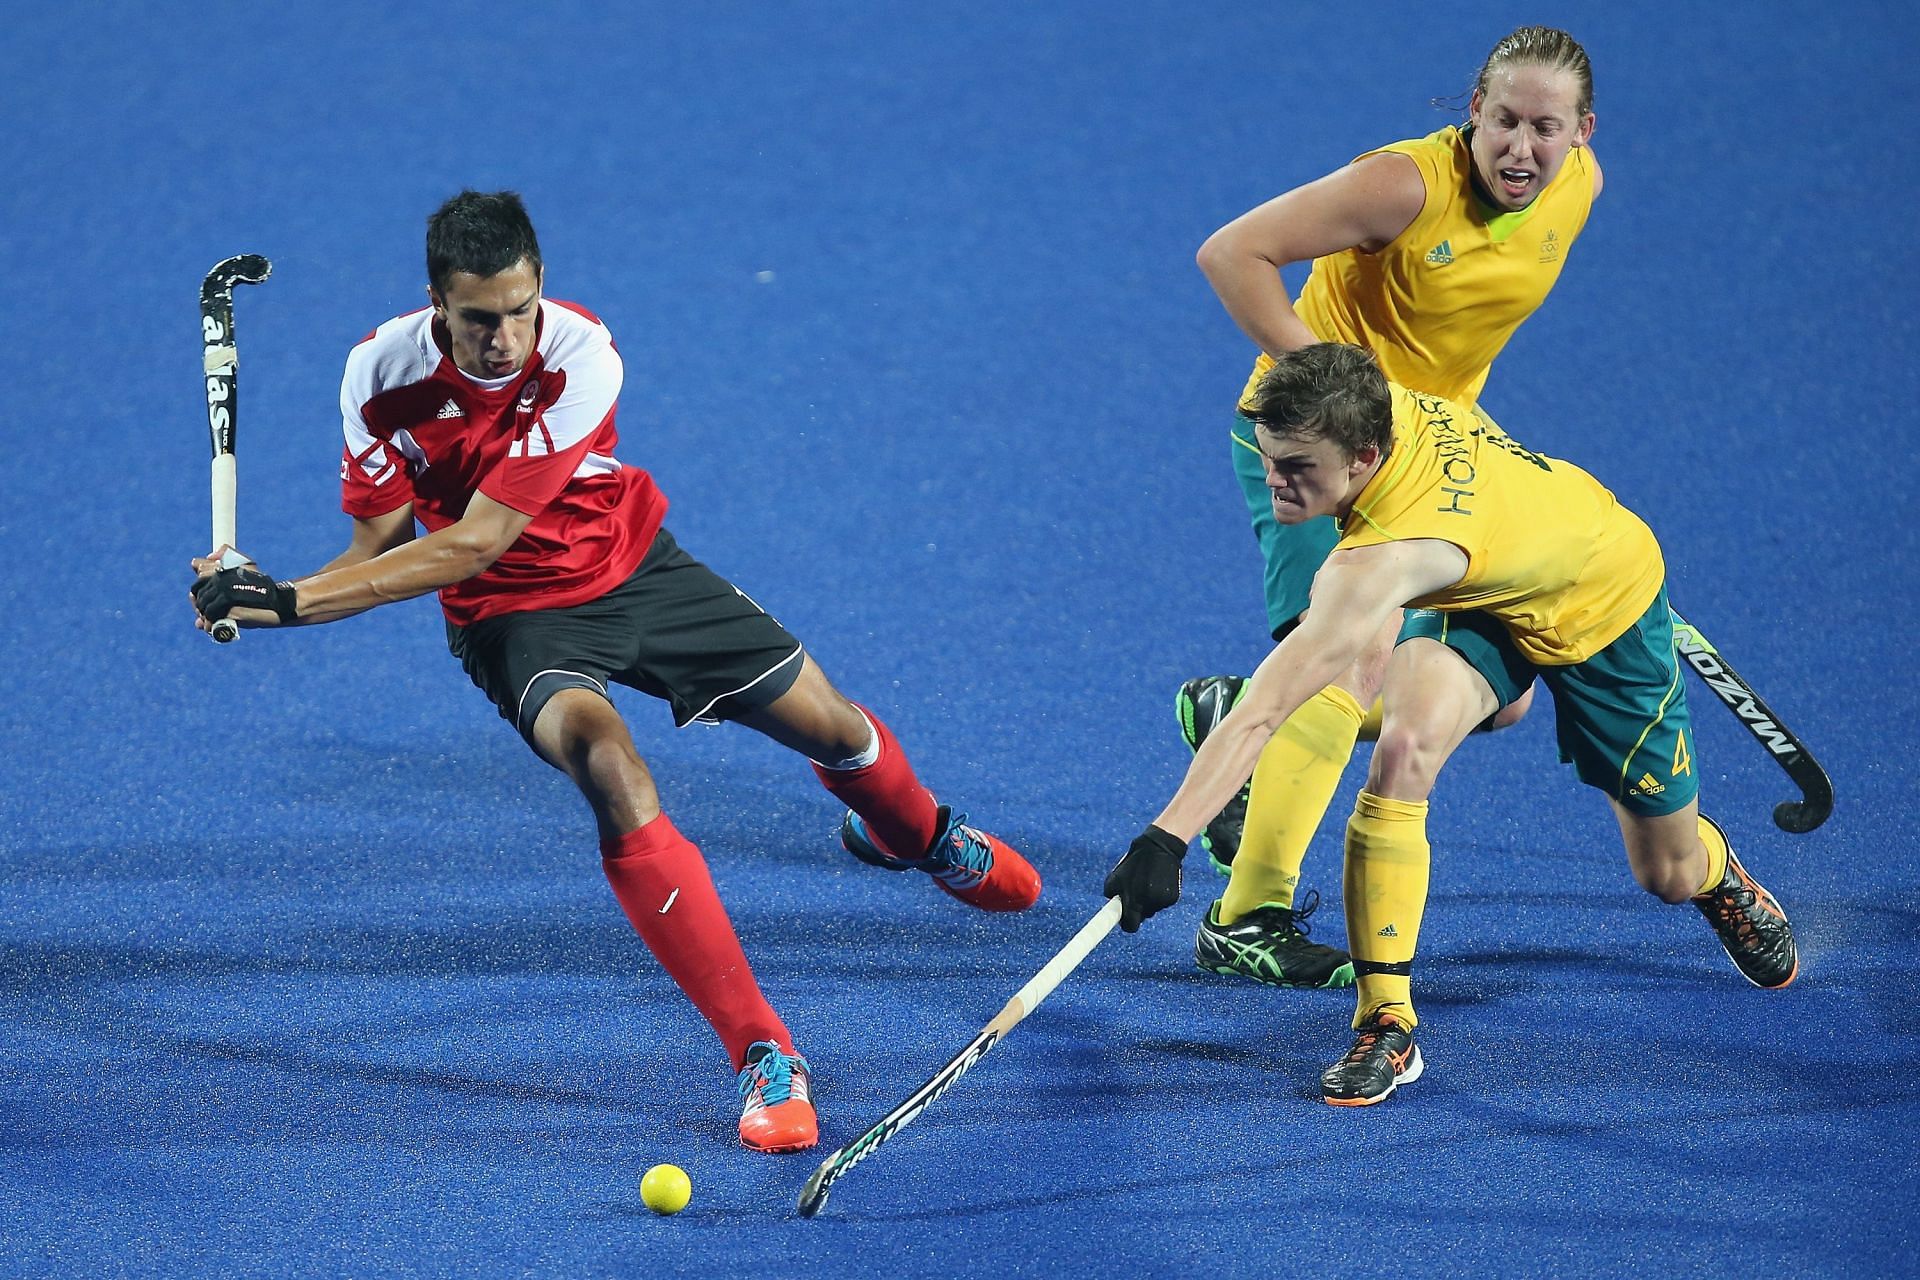 A Hockey5s match in progress between Australia and Canada at the Youth Olympics. (PC: Getty Images)